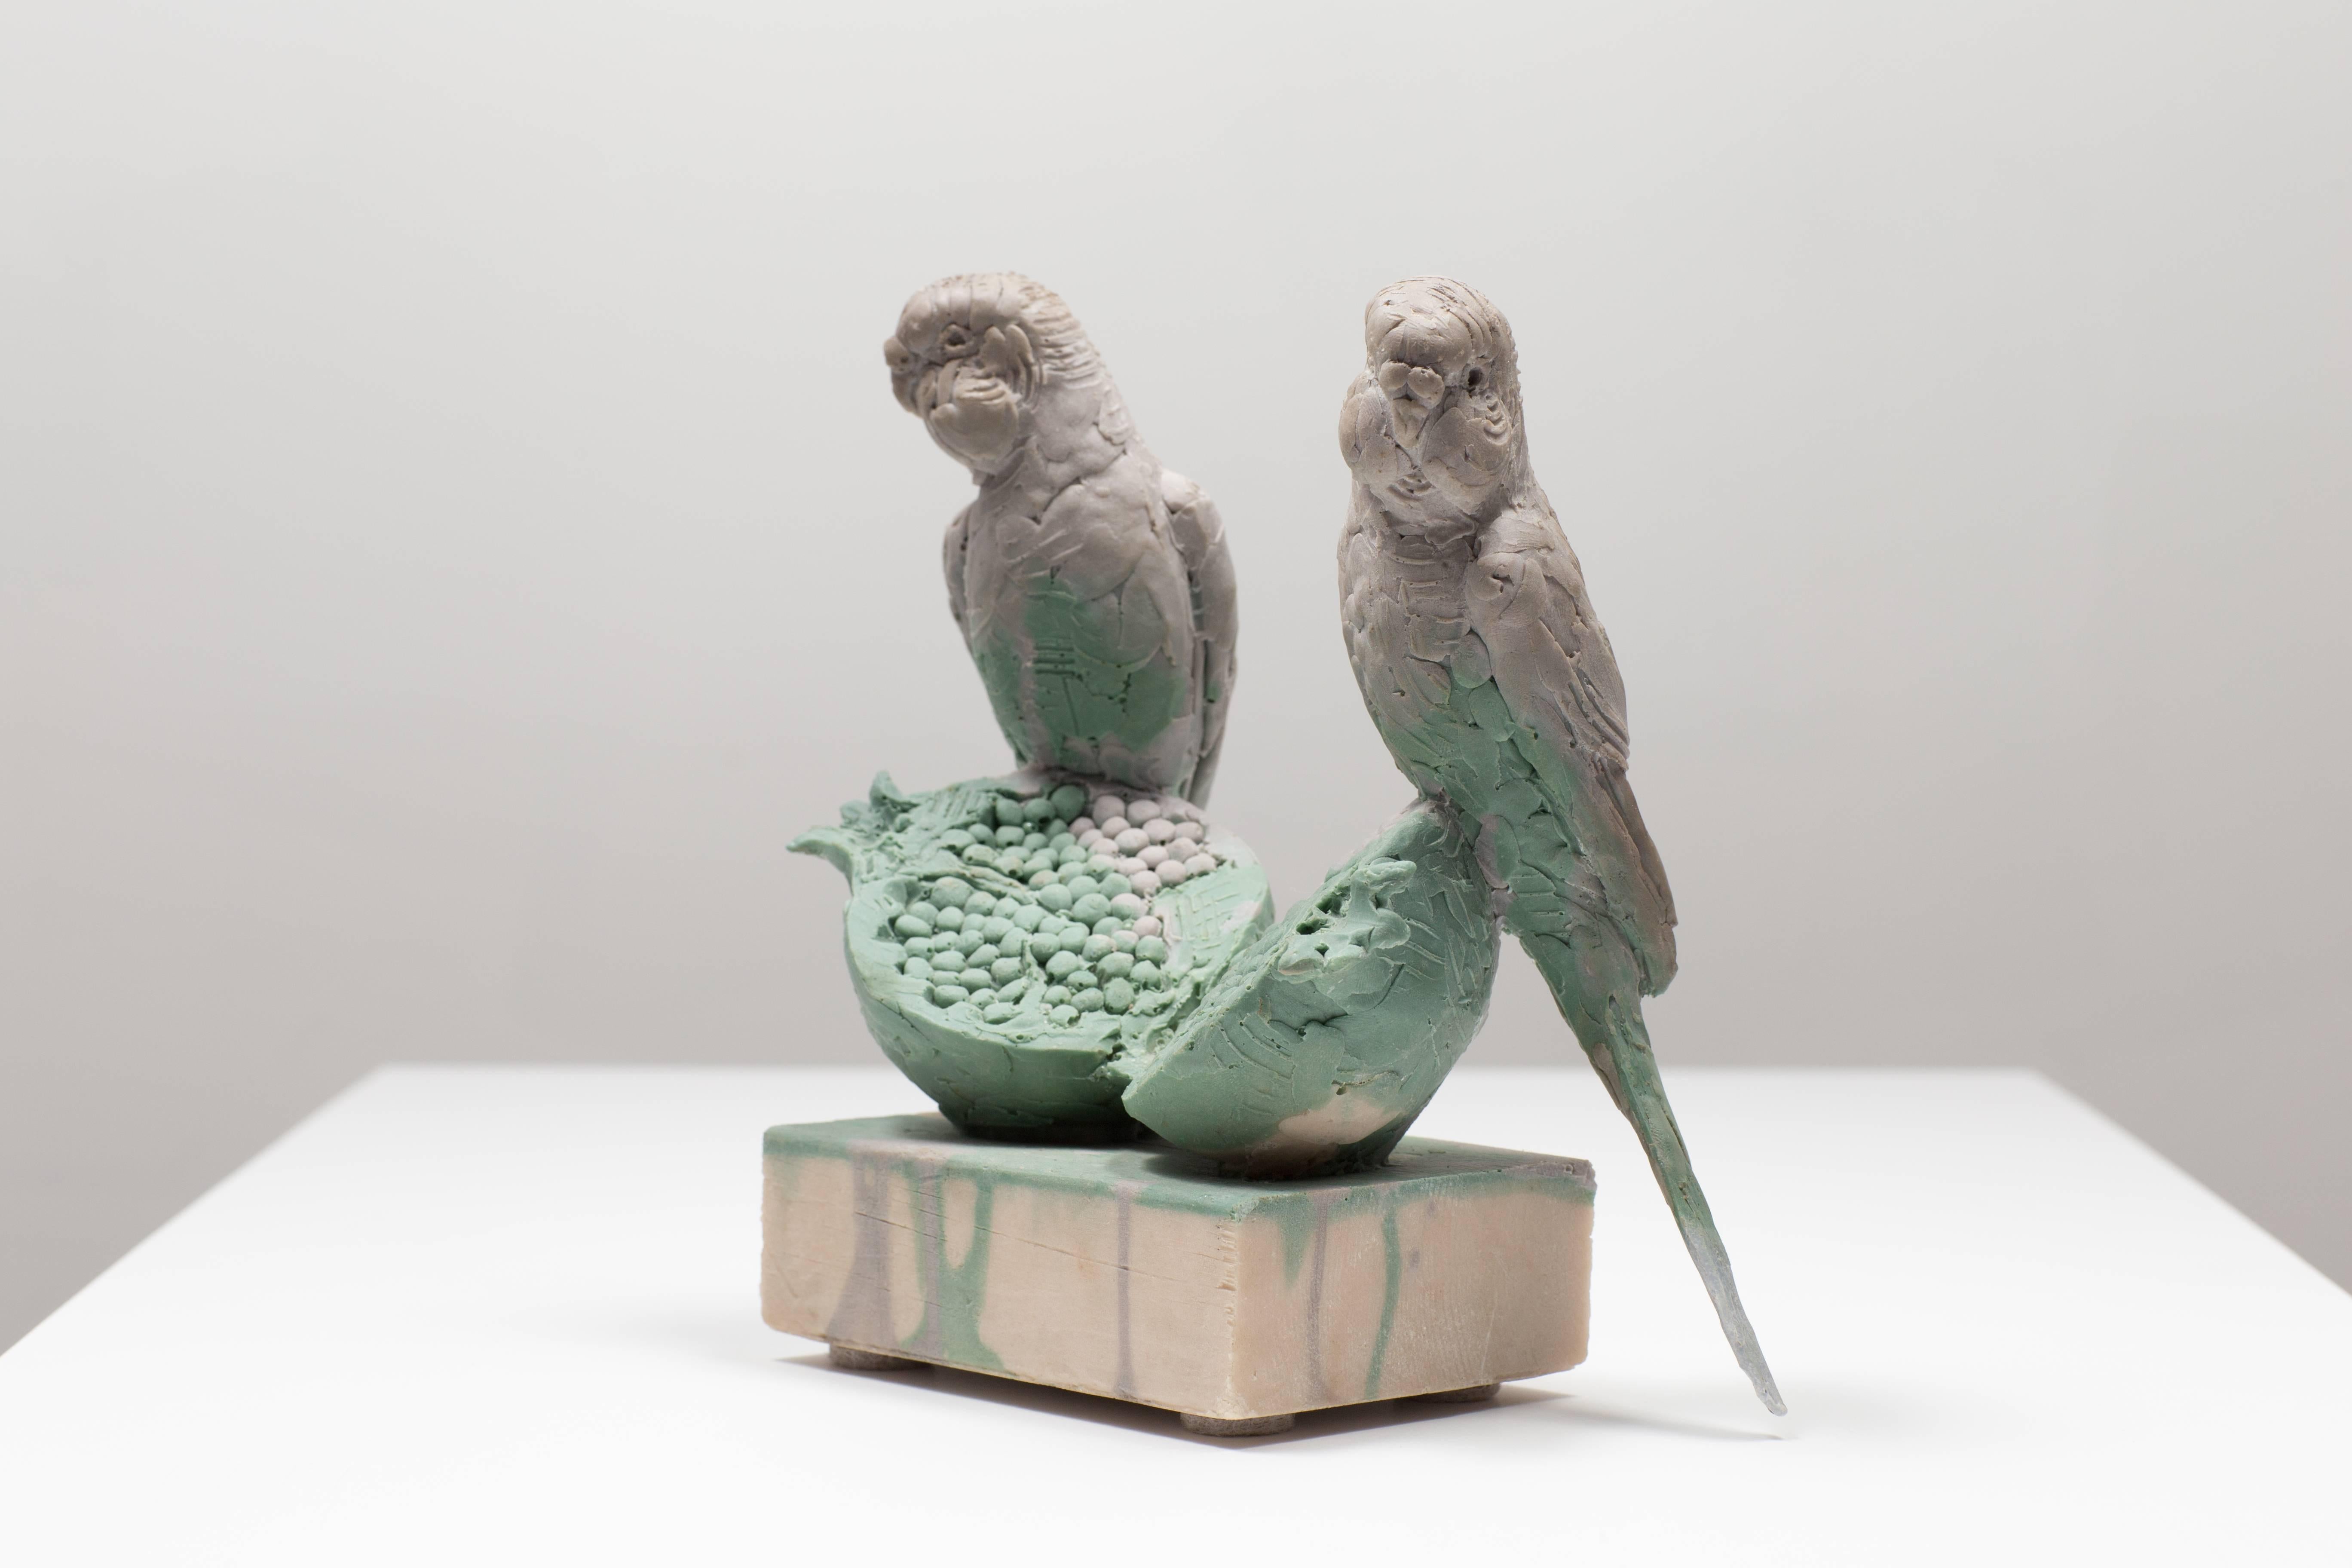 Budgies - Sculpture by Nicholas Crombach